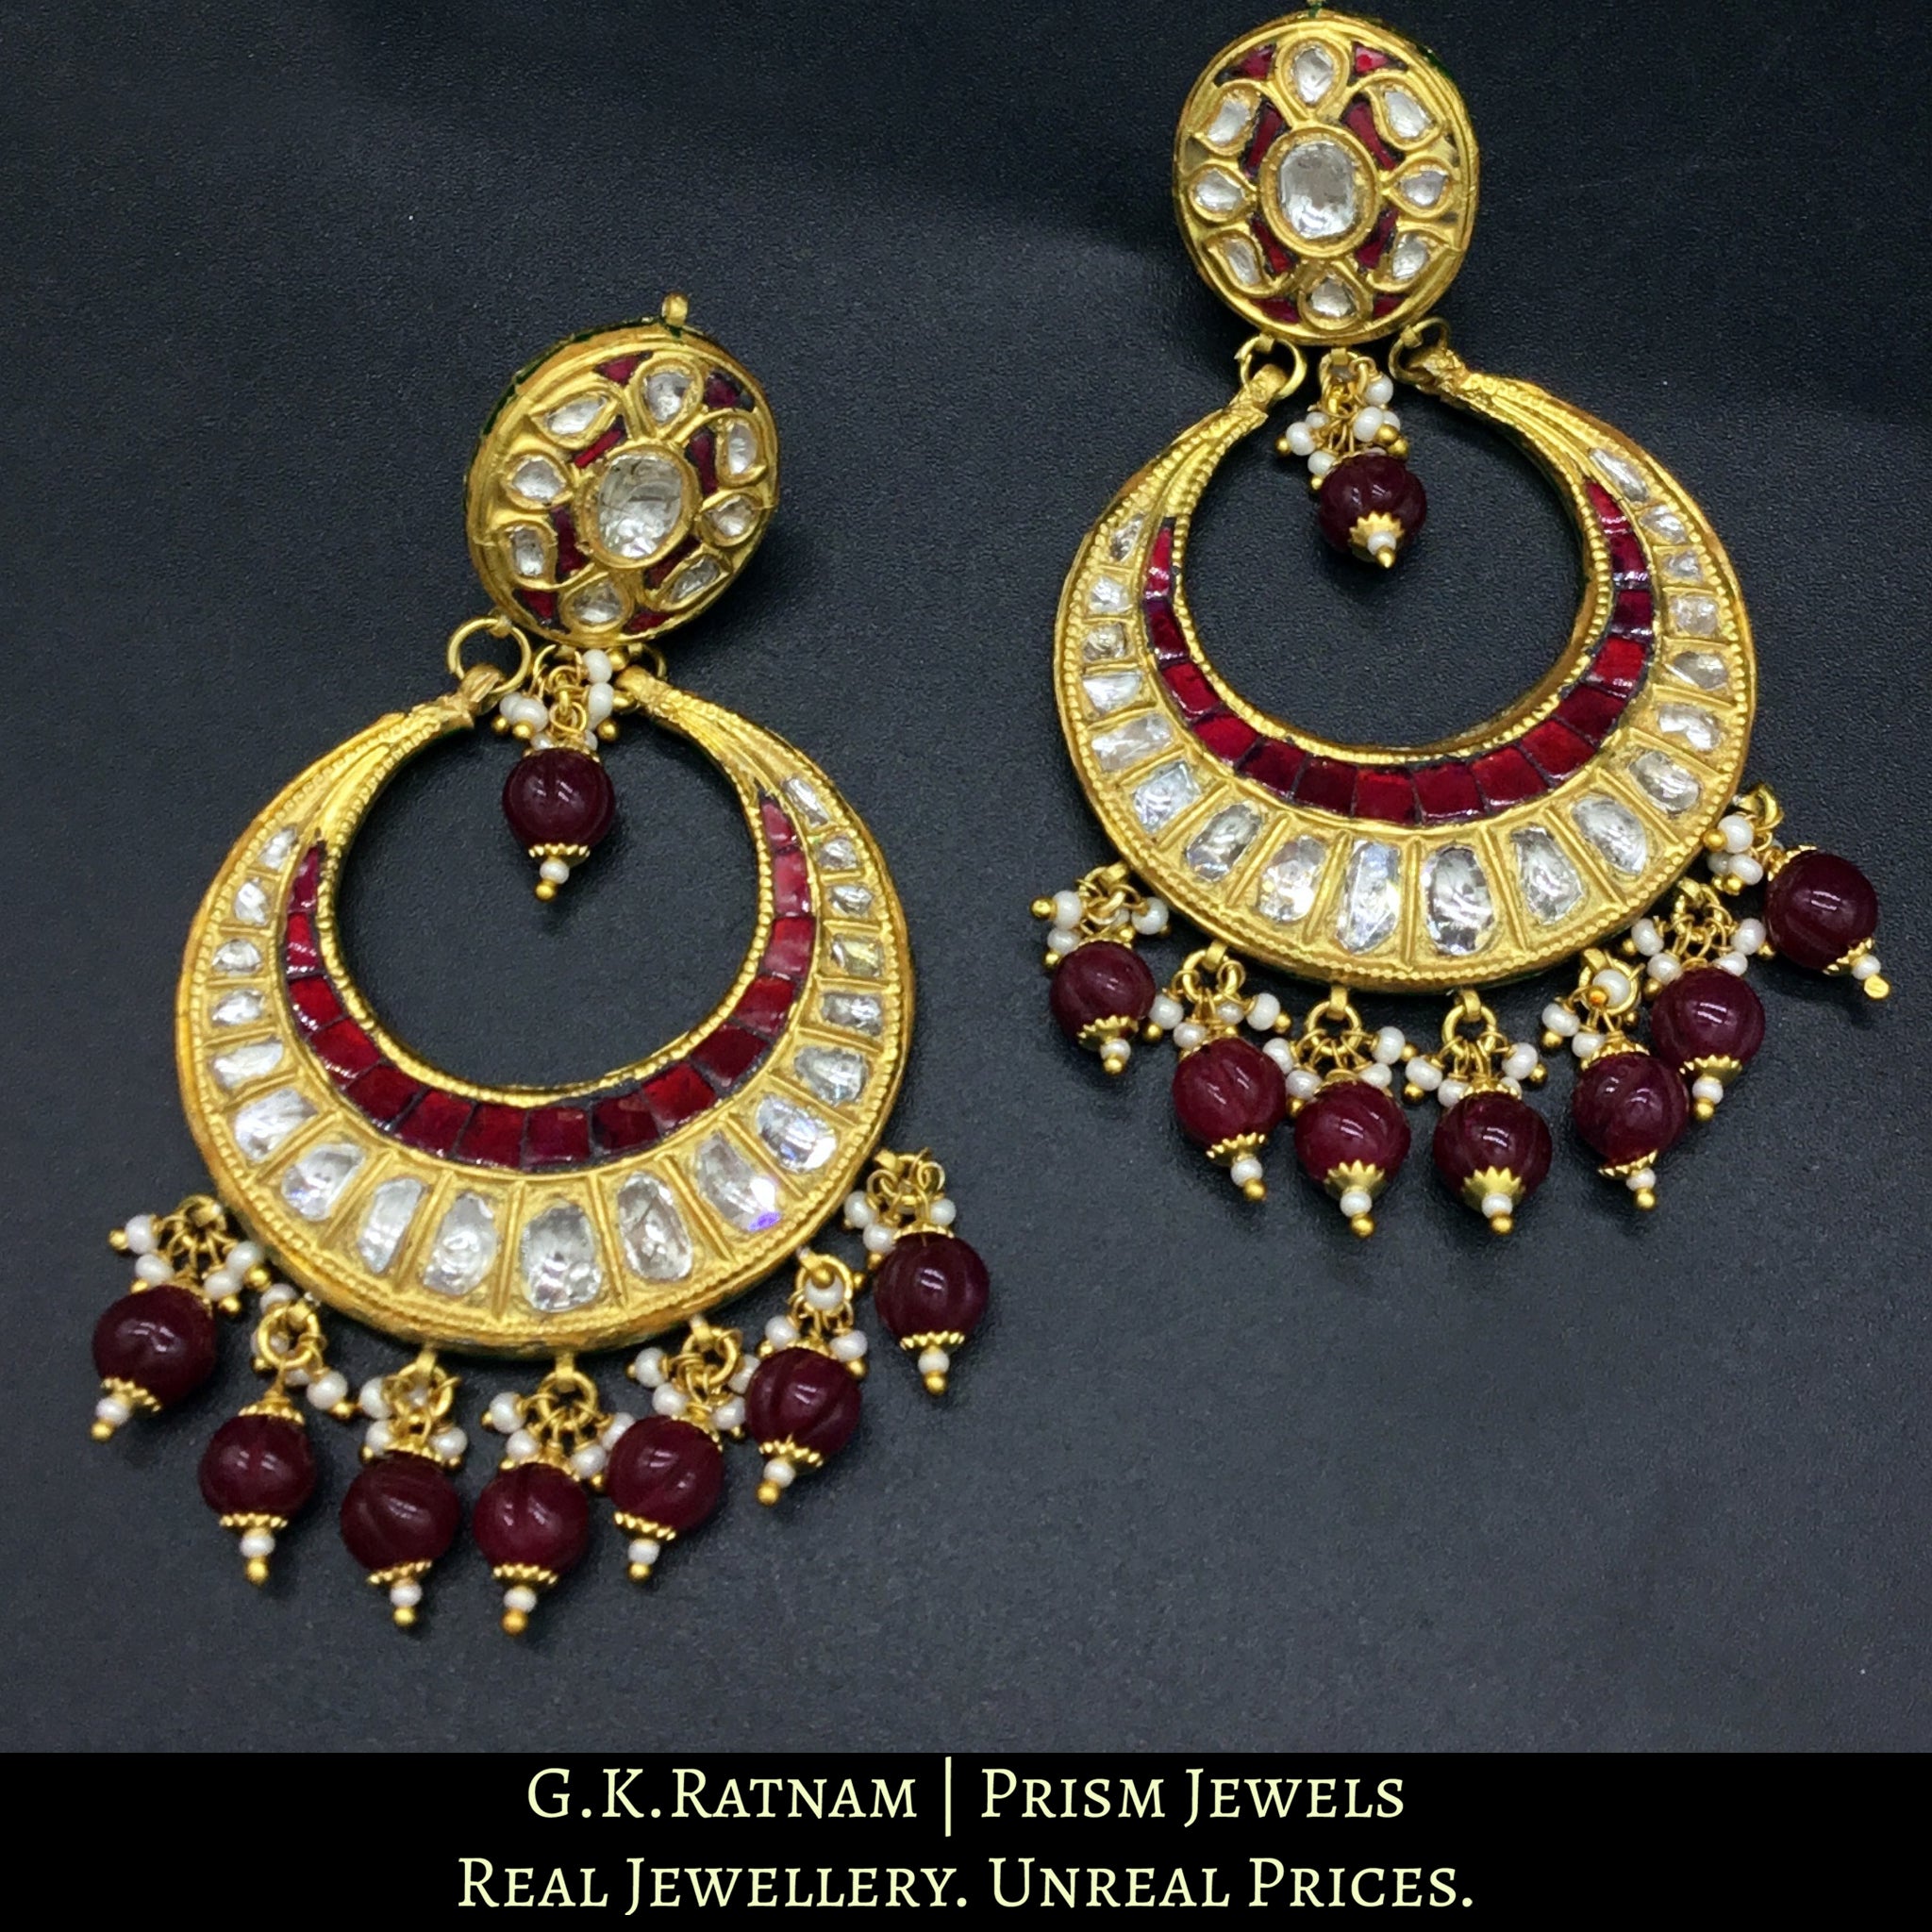 23k Gold and Diamond Polki Chand Bali Earring pair with round ruby-red beads